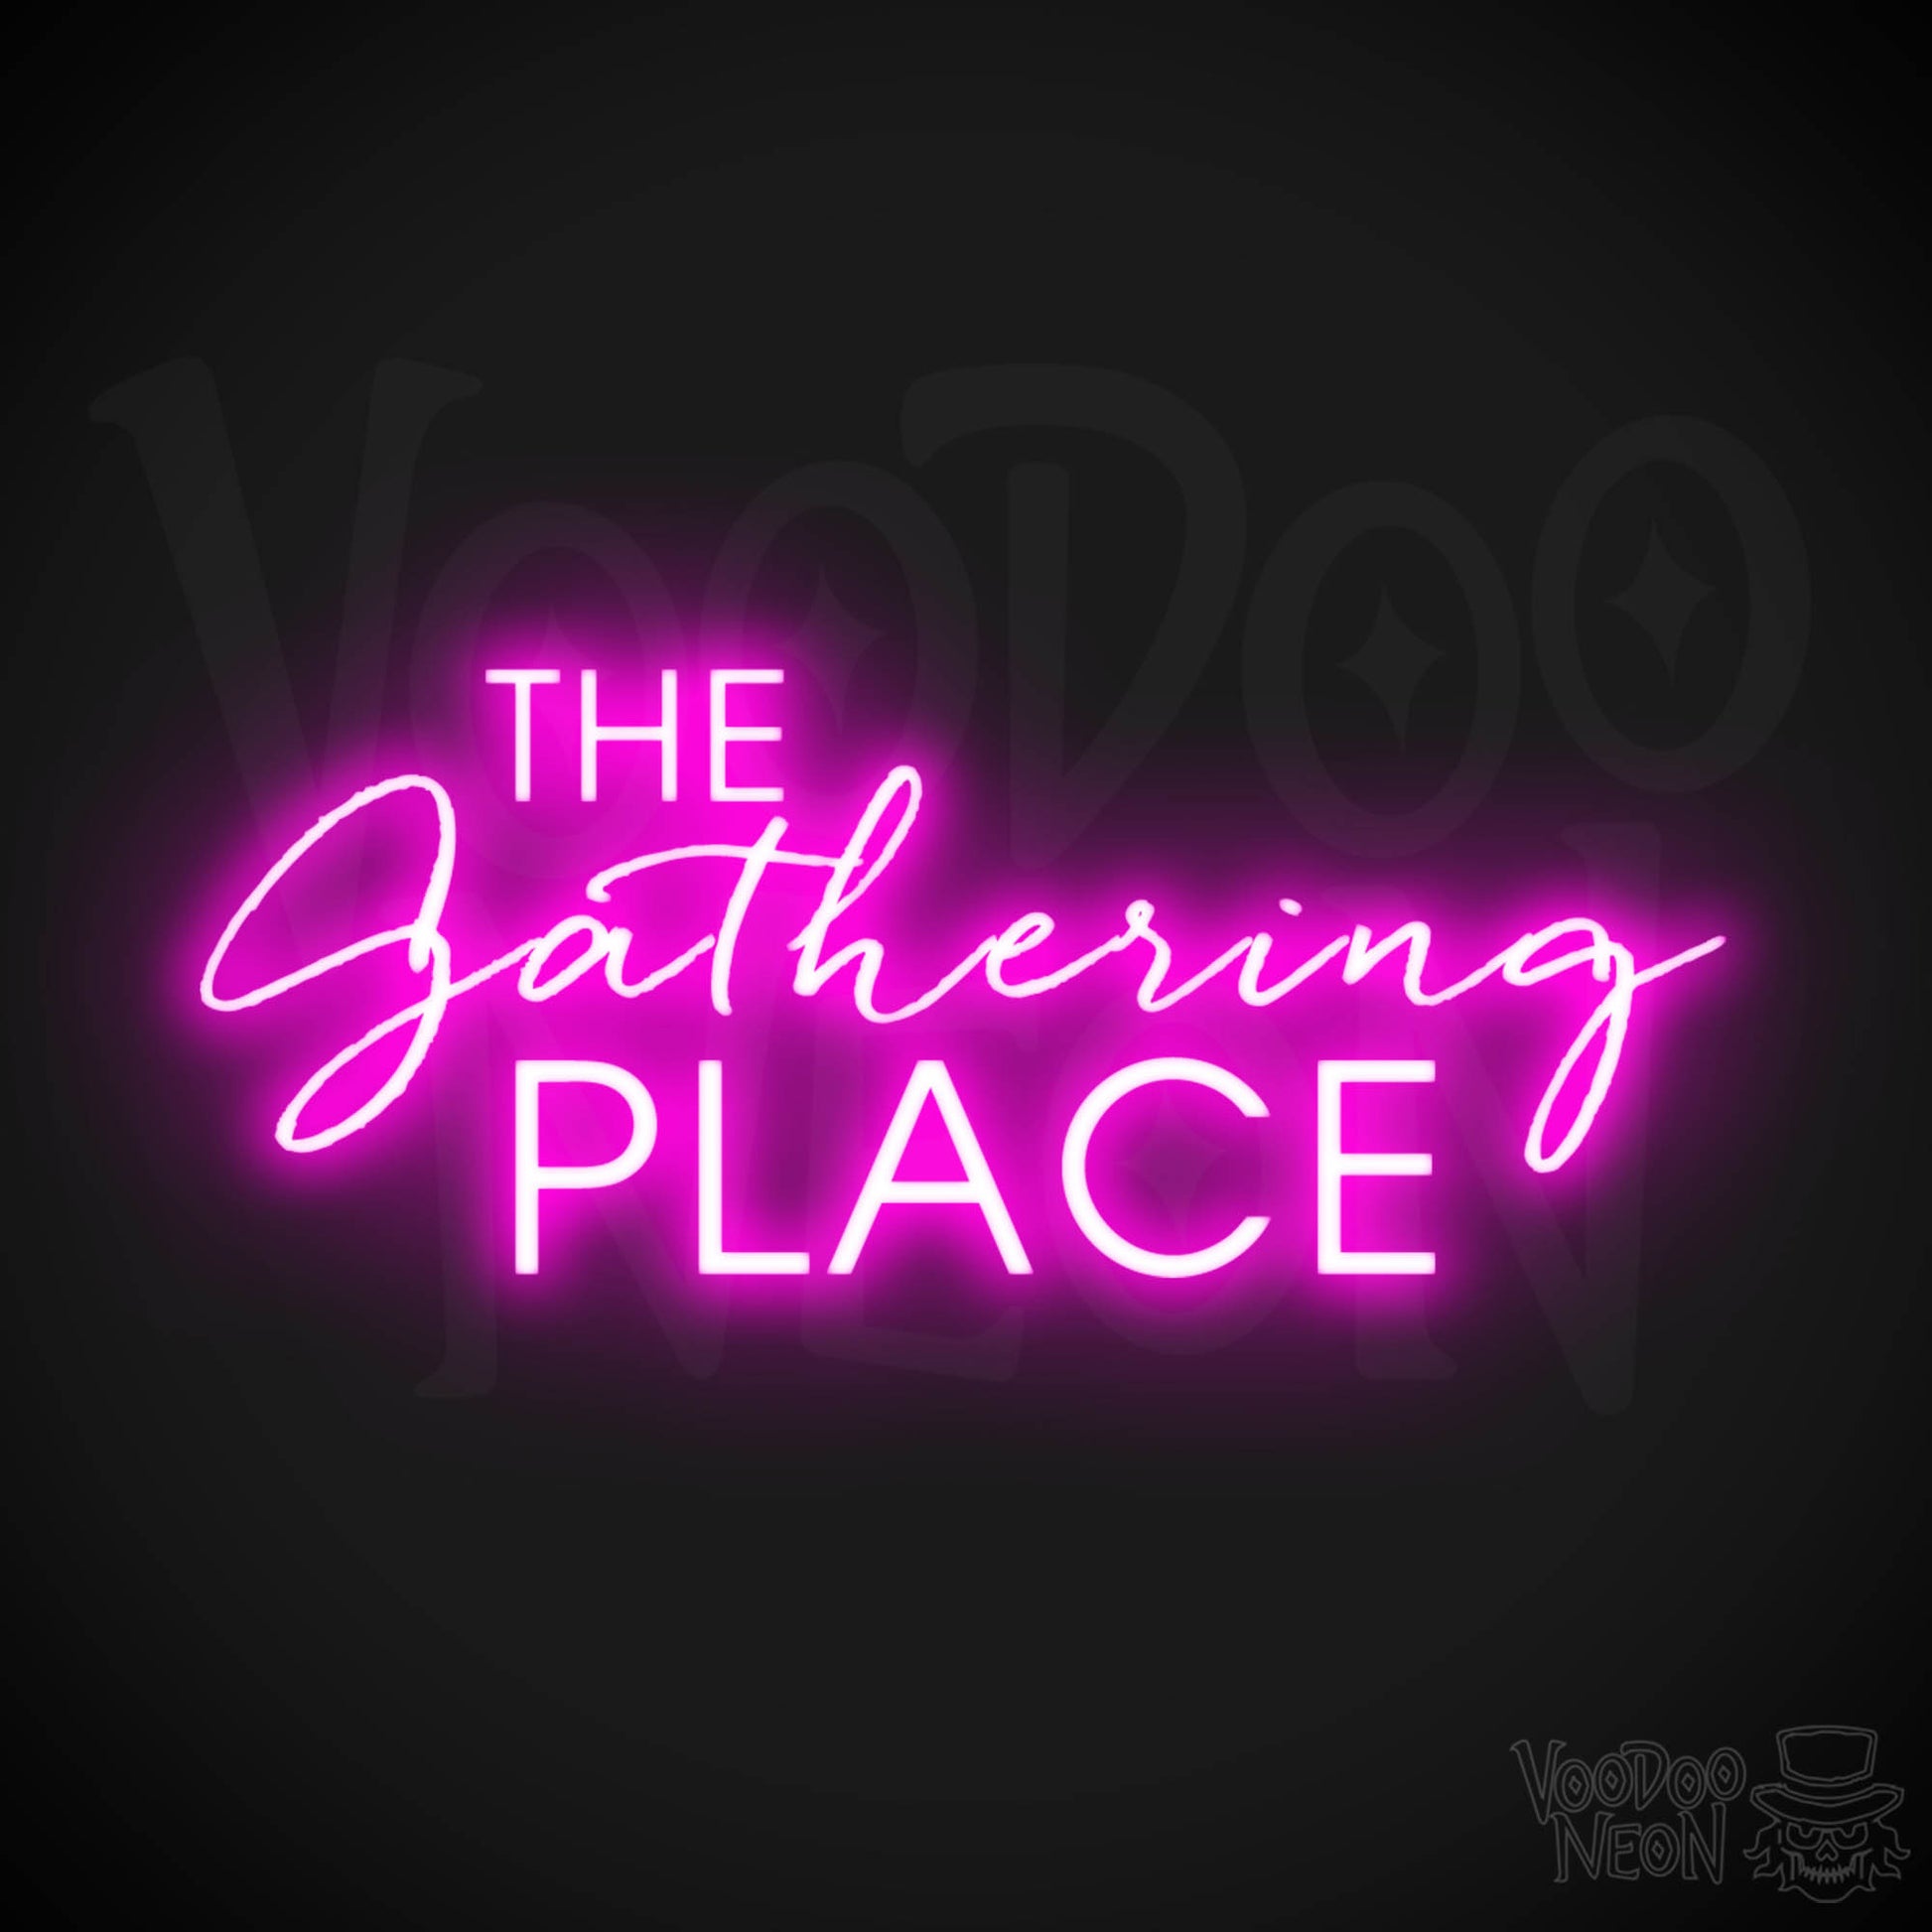 The Gathering Place Neon Sign - Neon The Gathering Place Sign - Wall Art - Color Pink